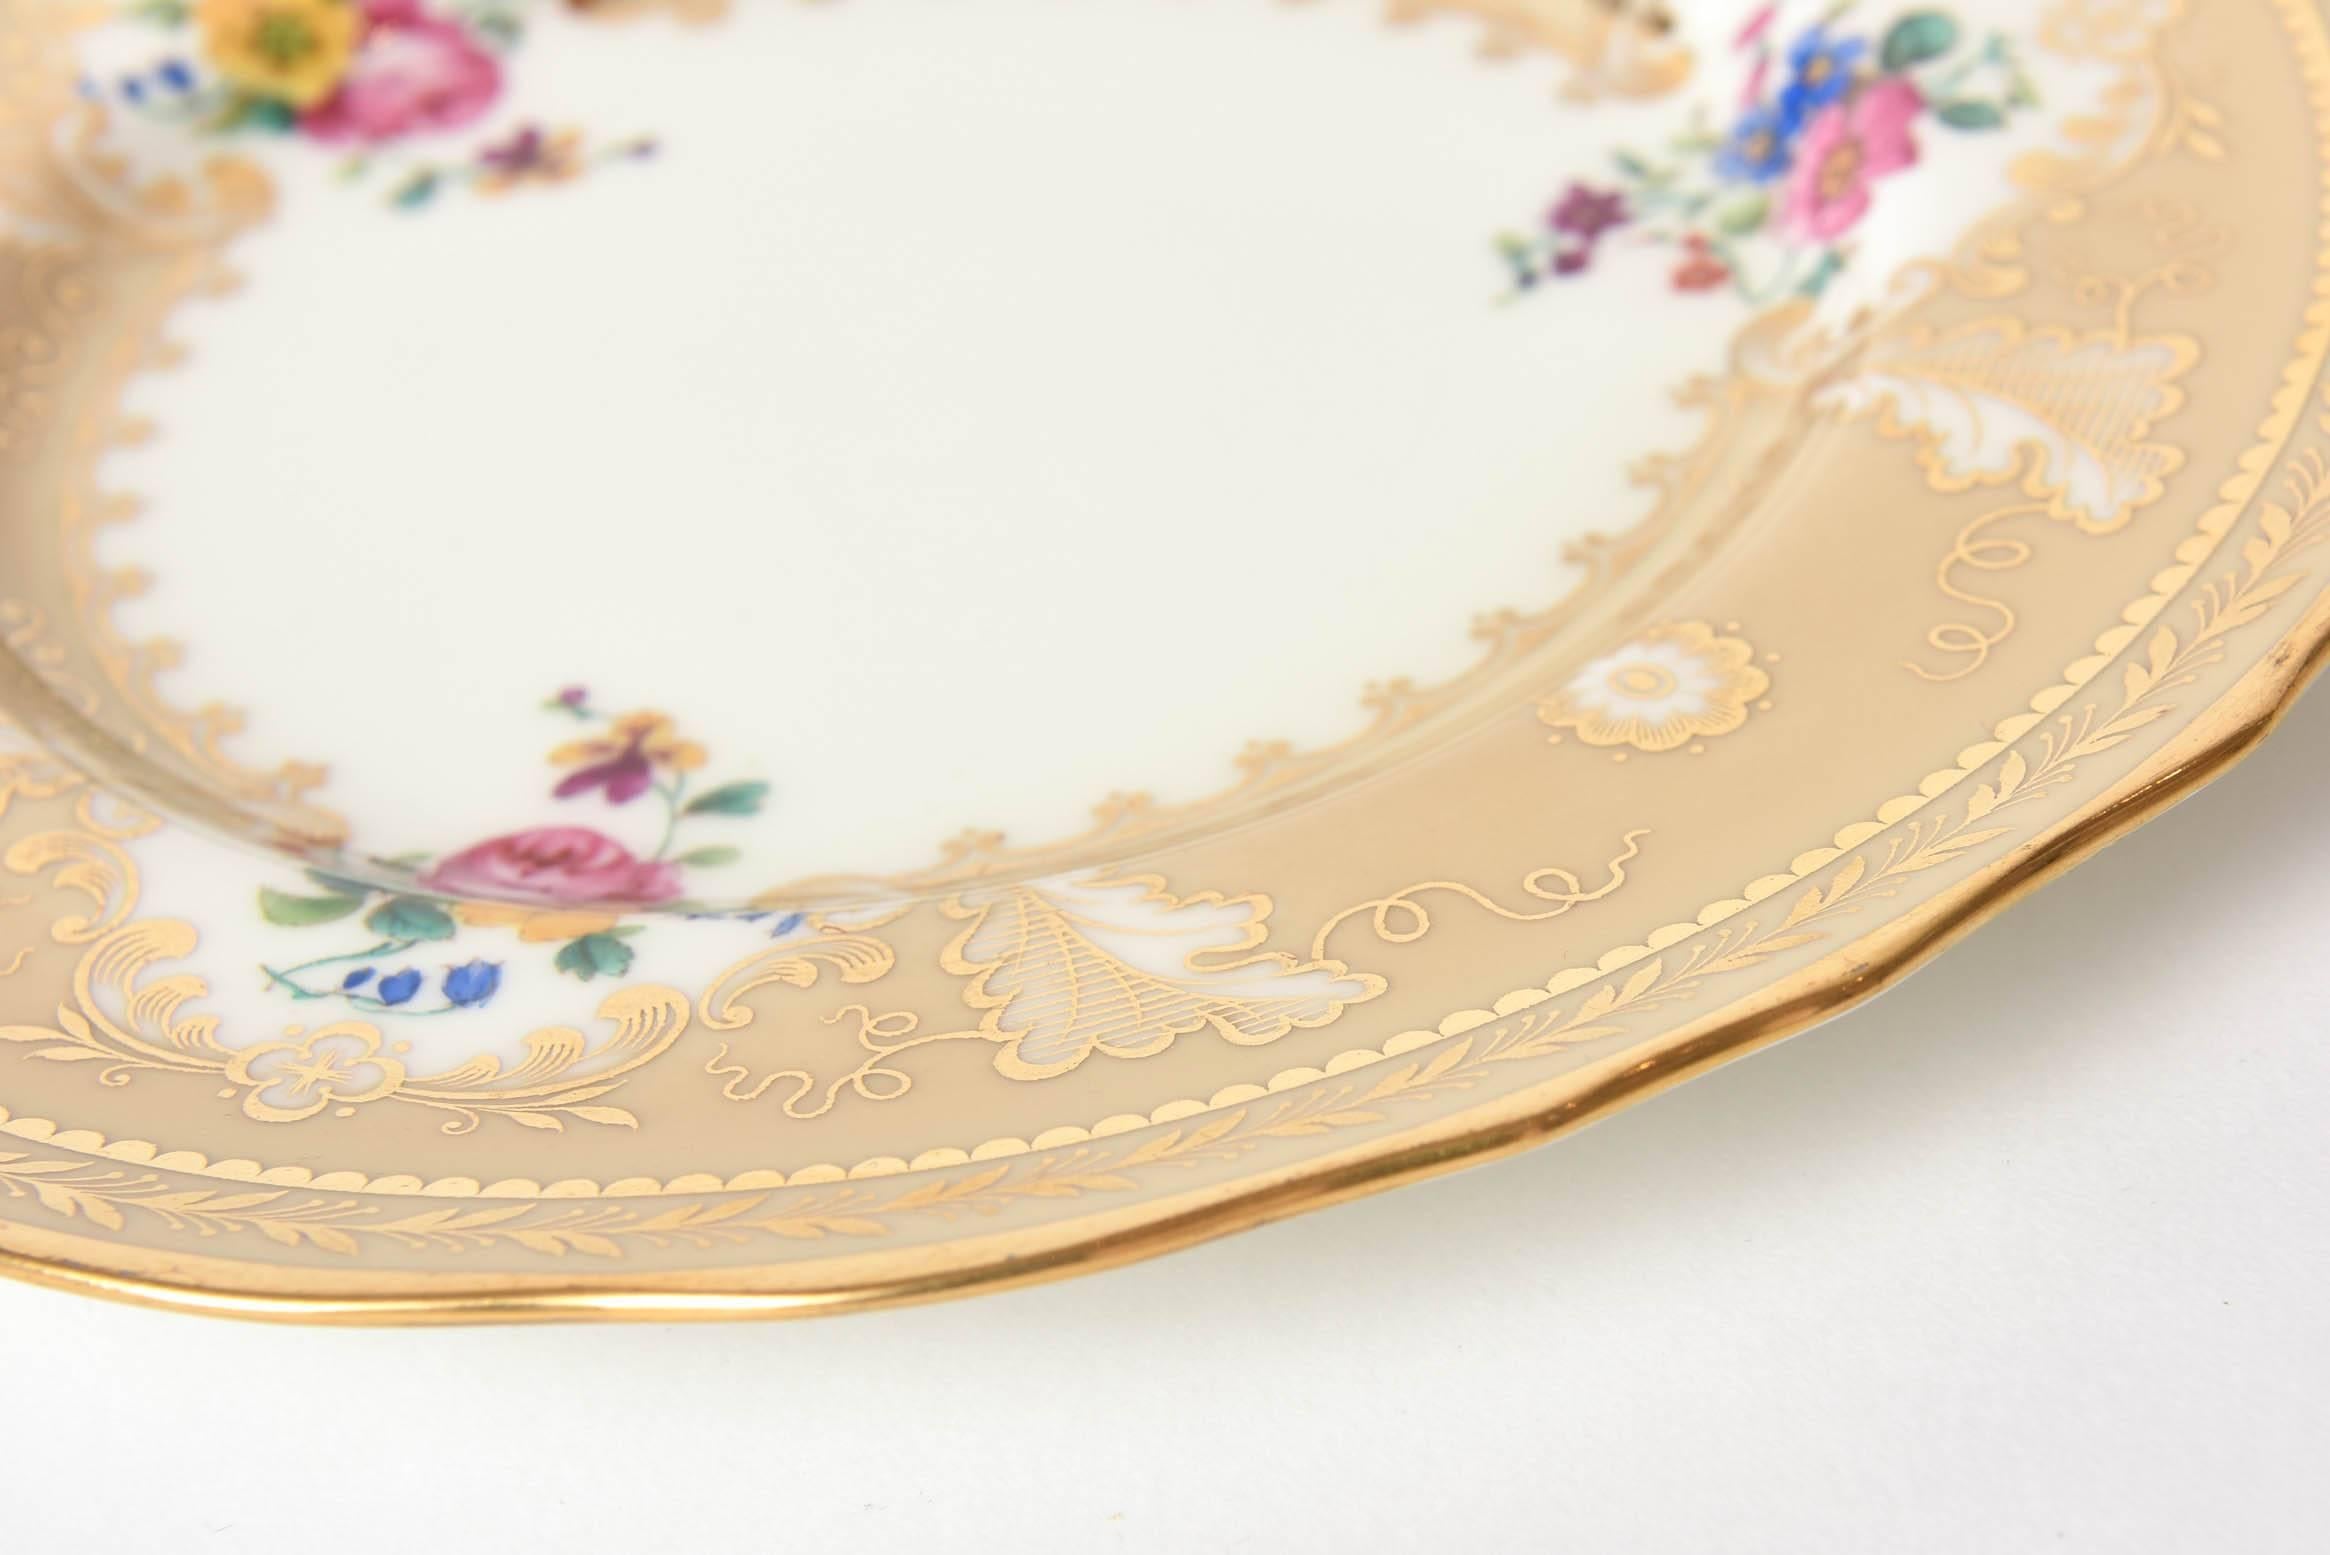 Ten Antique English Dessert Plates, a Pretty Scalloped Shape with Hand-Painting 1